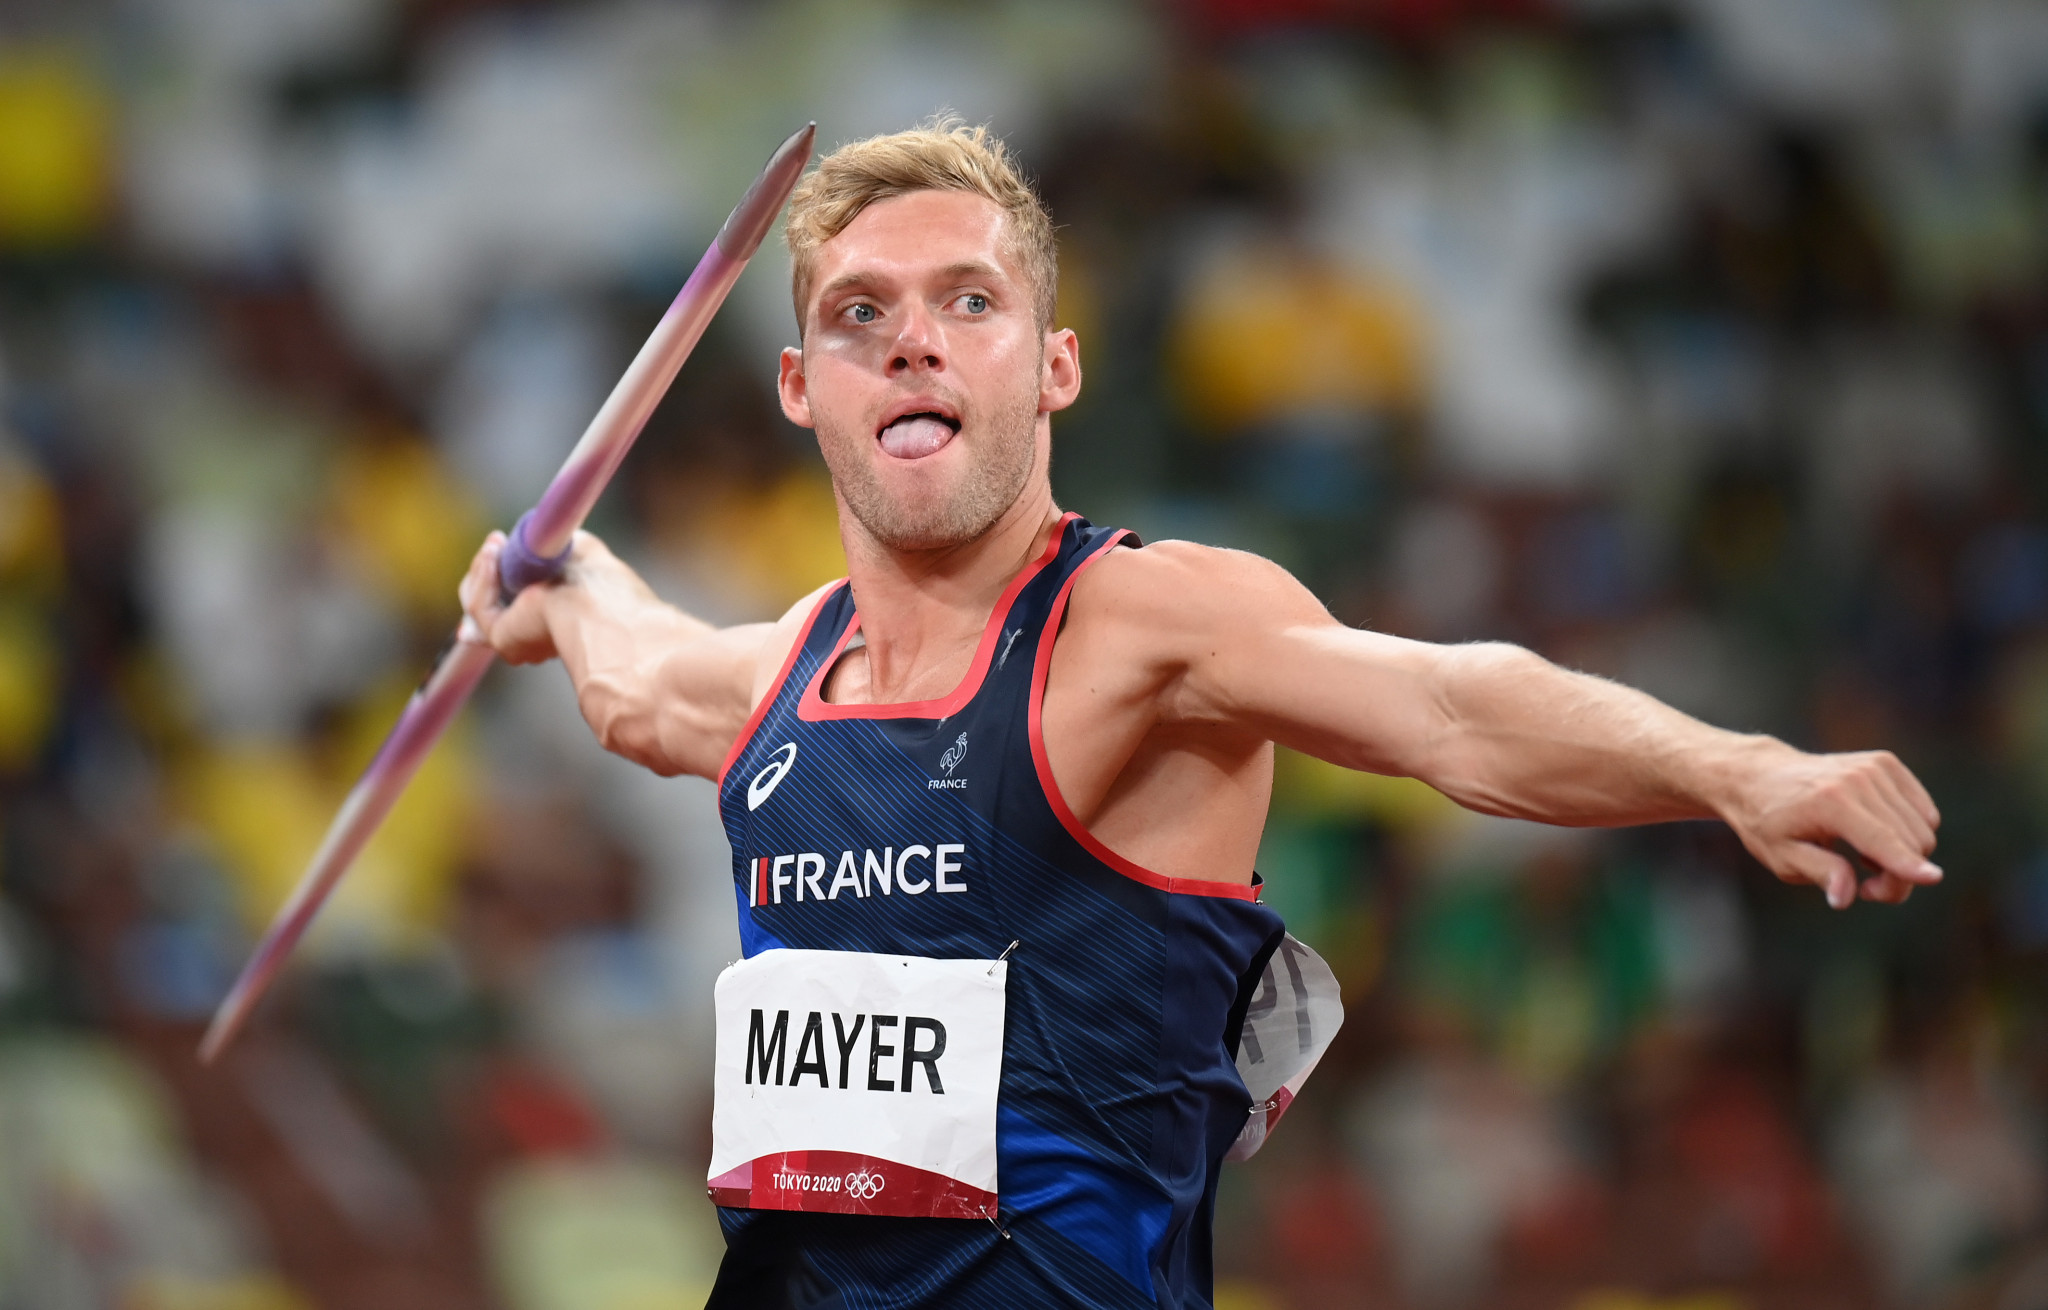 Kevin Mayer won France's only athletics medal at Tokyo 2020 in the men's decathlon, and the sport was one of 19 classified as achieving 